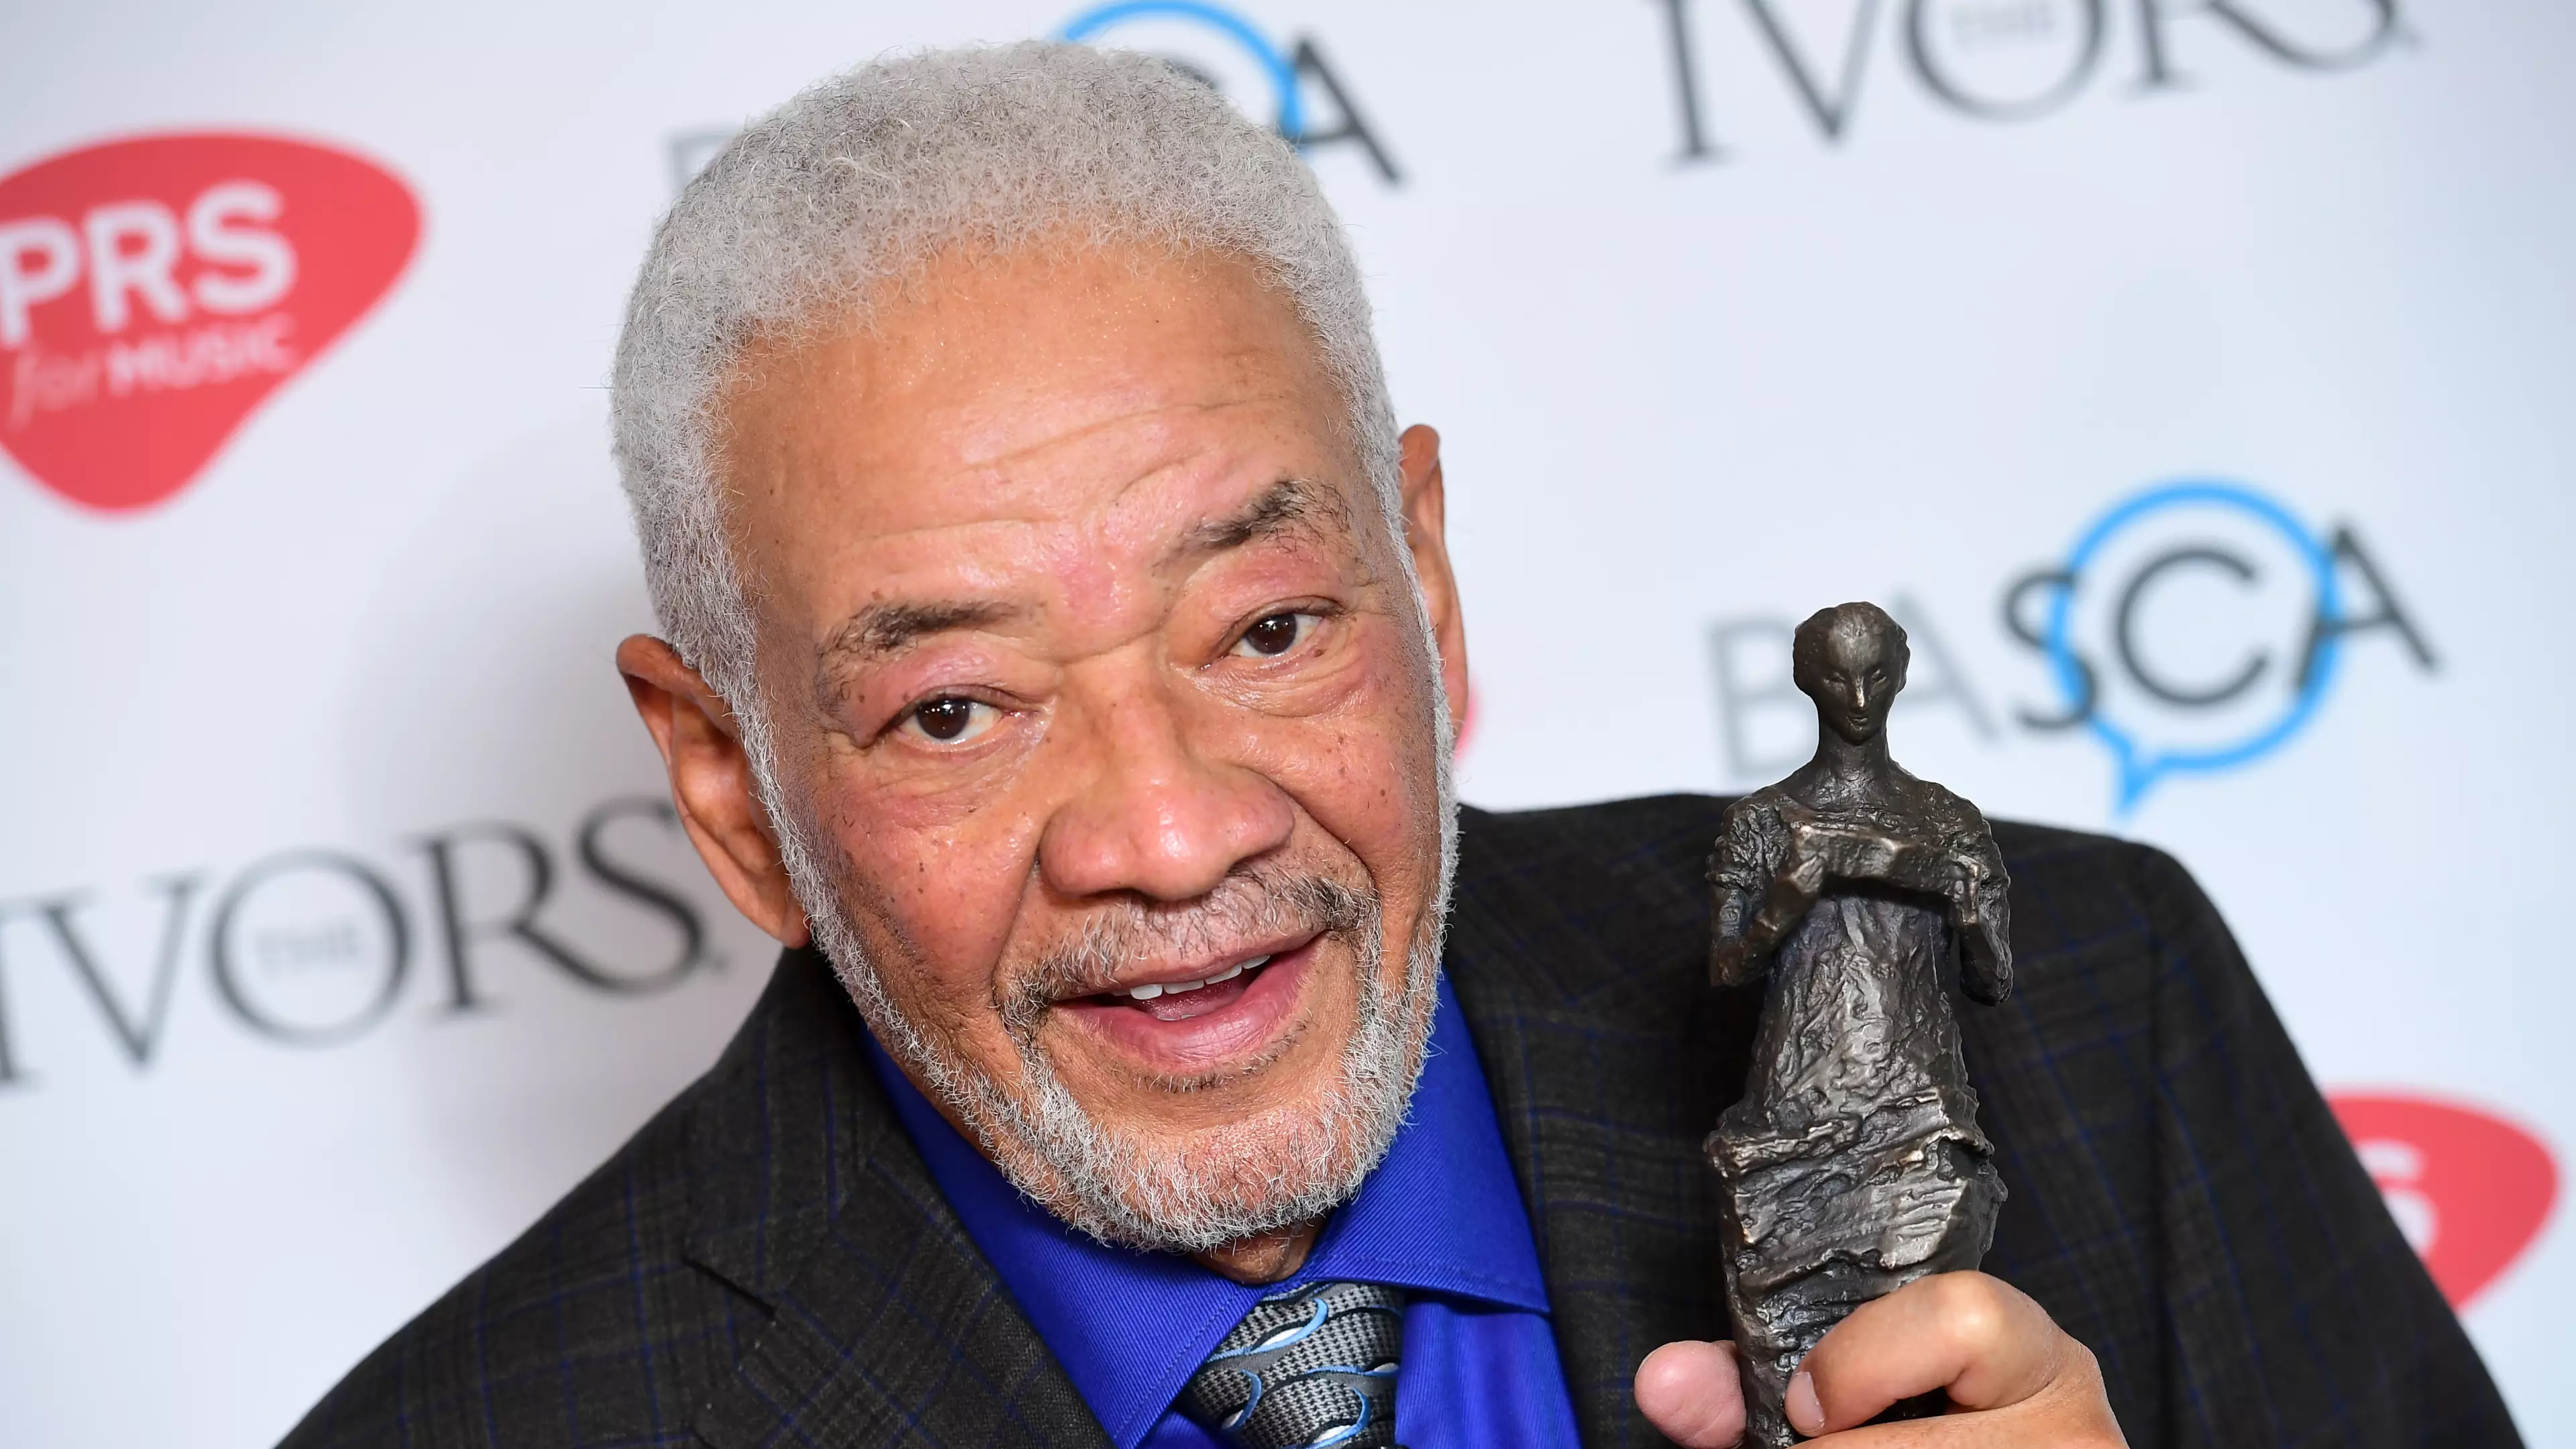 Lean On Me Singer Bill Withers Dies At 81